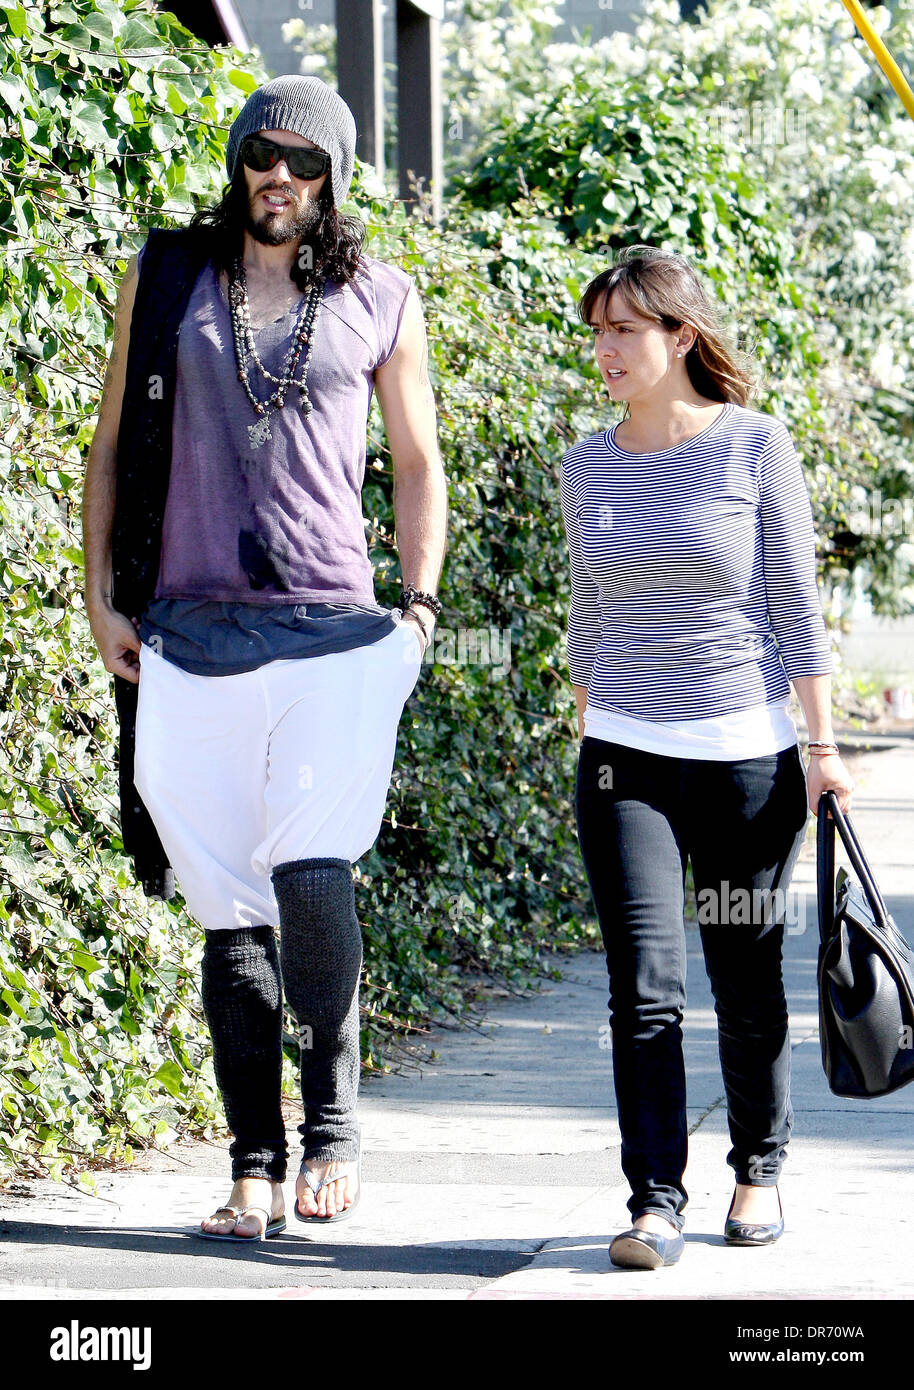 Russell Brand whose new talk show, 'Brand X' premiered last night, is  spotted leaving West Hollywood Lions Club with a friend. Brand is wearing a  winter hat and leg warmers in the